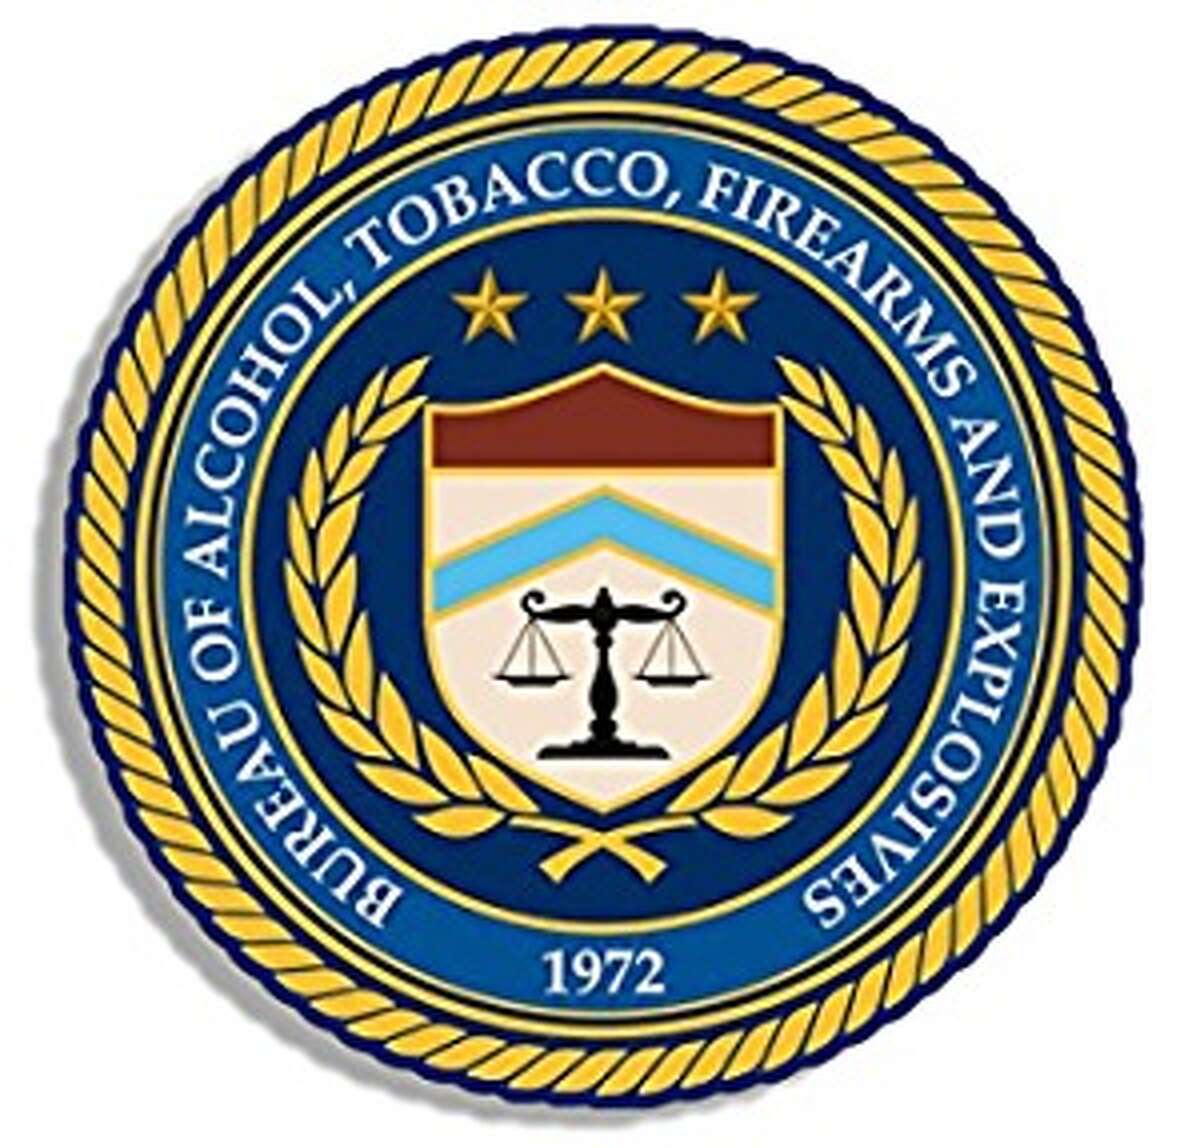 Bureau of Alcohol, Tobacco, Firearms and Explosives.